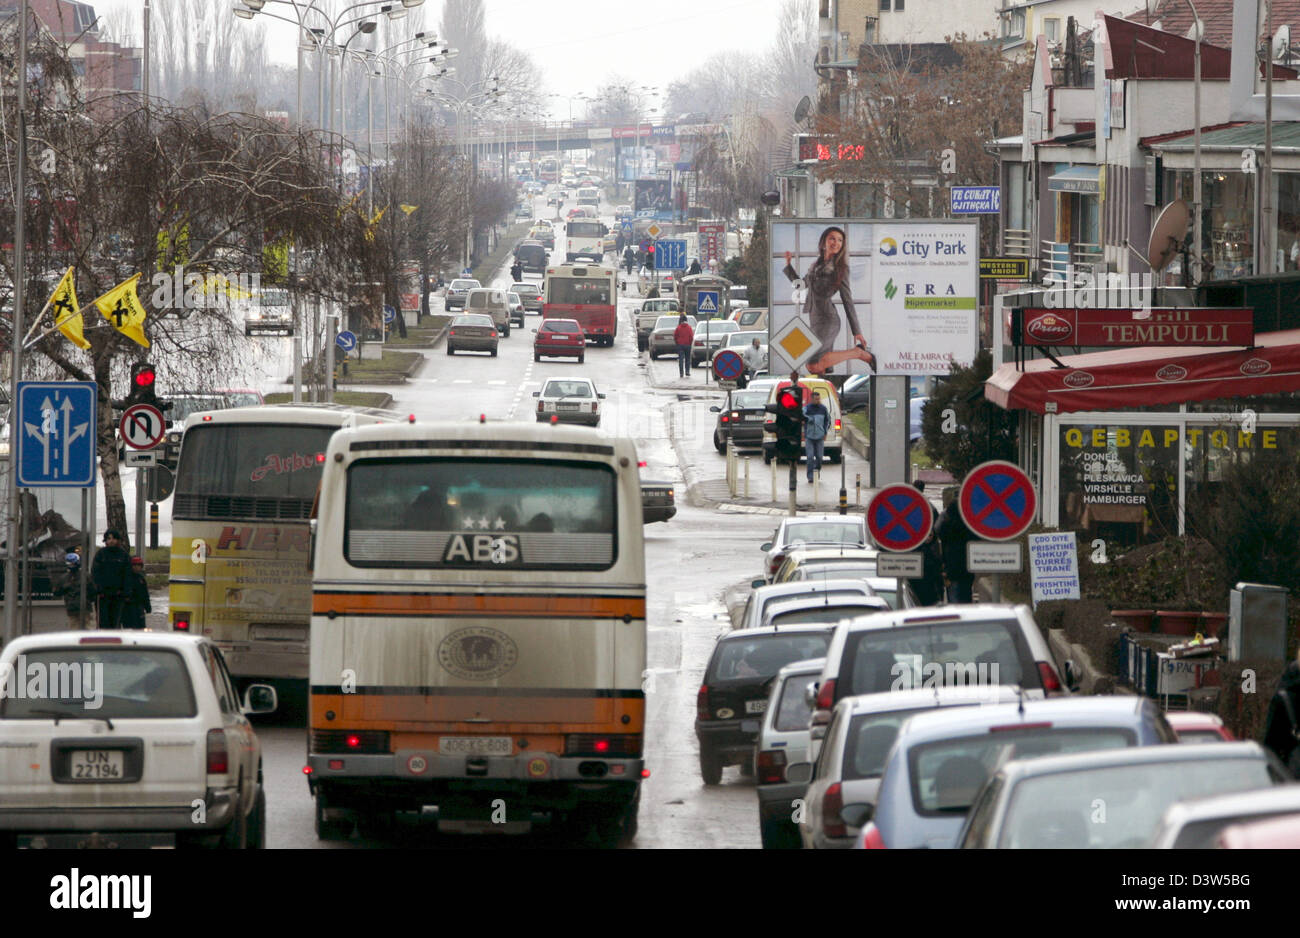 The traffic is pictured in the capital of the Kosovo, Pristina, Serbia, 11 December 2006. Administrated by the UN the Kosovo forms part of Serbia under international law. Pristina, as the third-biggest city of Serbia, is the biggest city of the Kosovo and its political, economic and cultural centre. The international missions of the UN, the EU and the OECD have their headquarters h Stock Photo